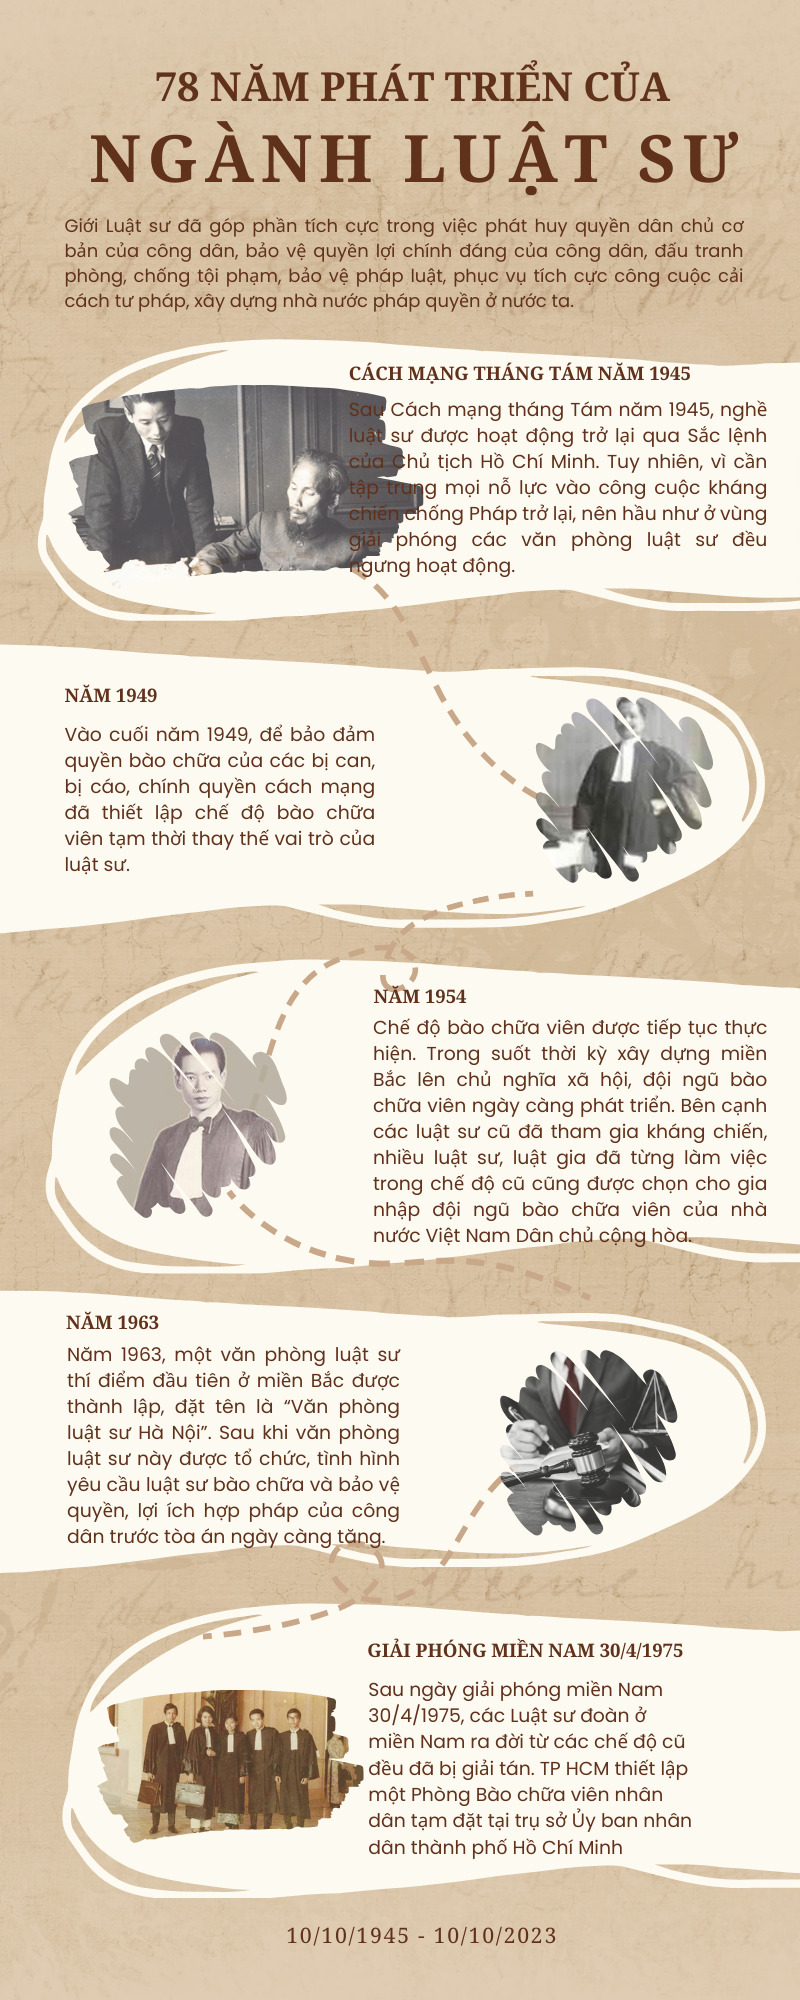 Beige Illustrated Geography and History Infographic (1)